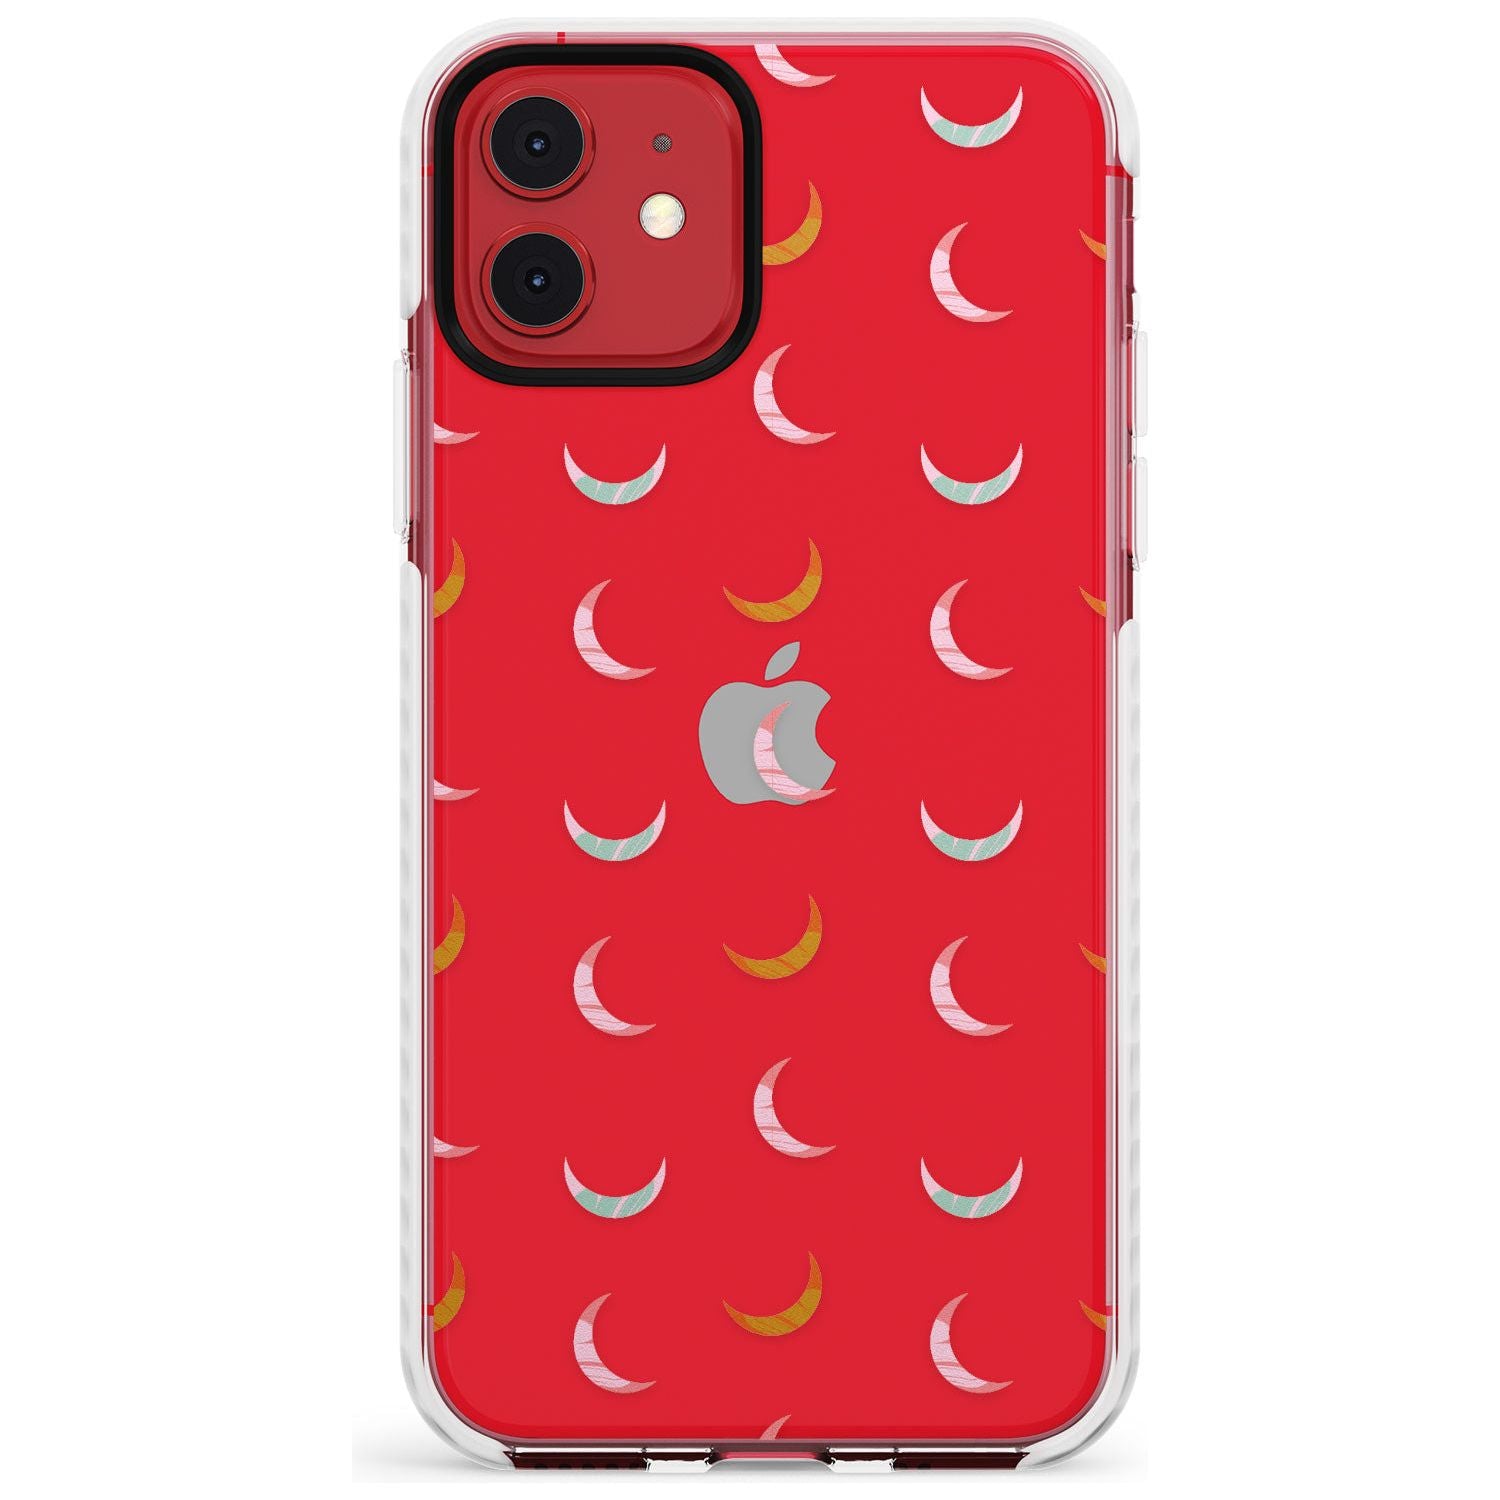 Colourful Crescent Moons Slim TPU Phone Case for iPhone 11